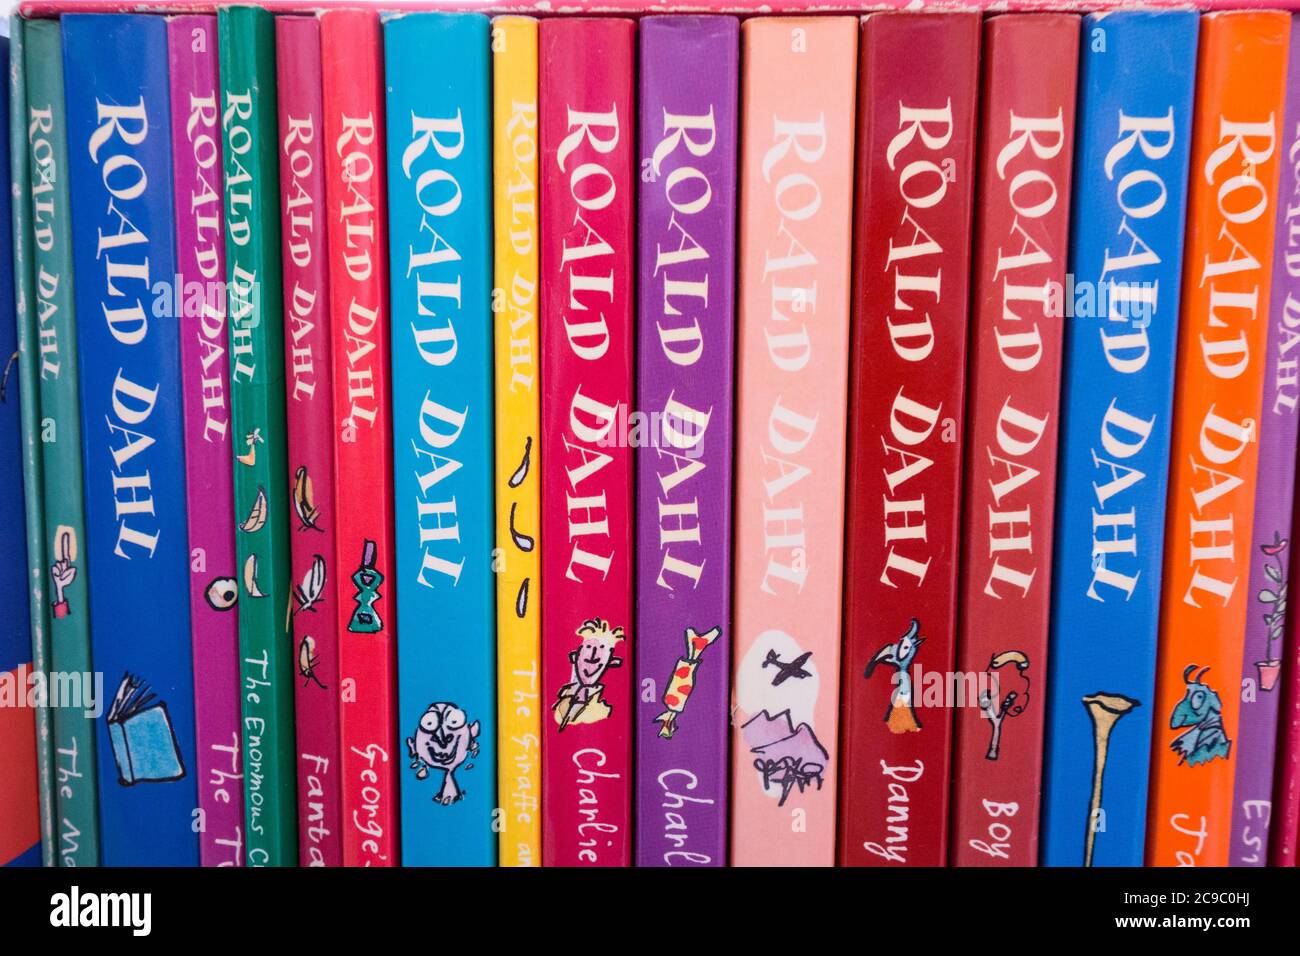 Closeup of colourful Roald Dahl book covers, spines, illustrations and artwork Stock Photo